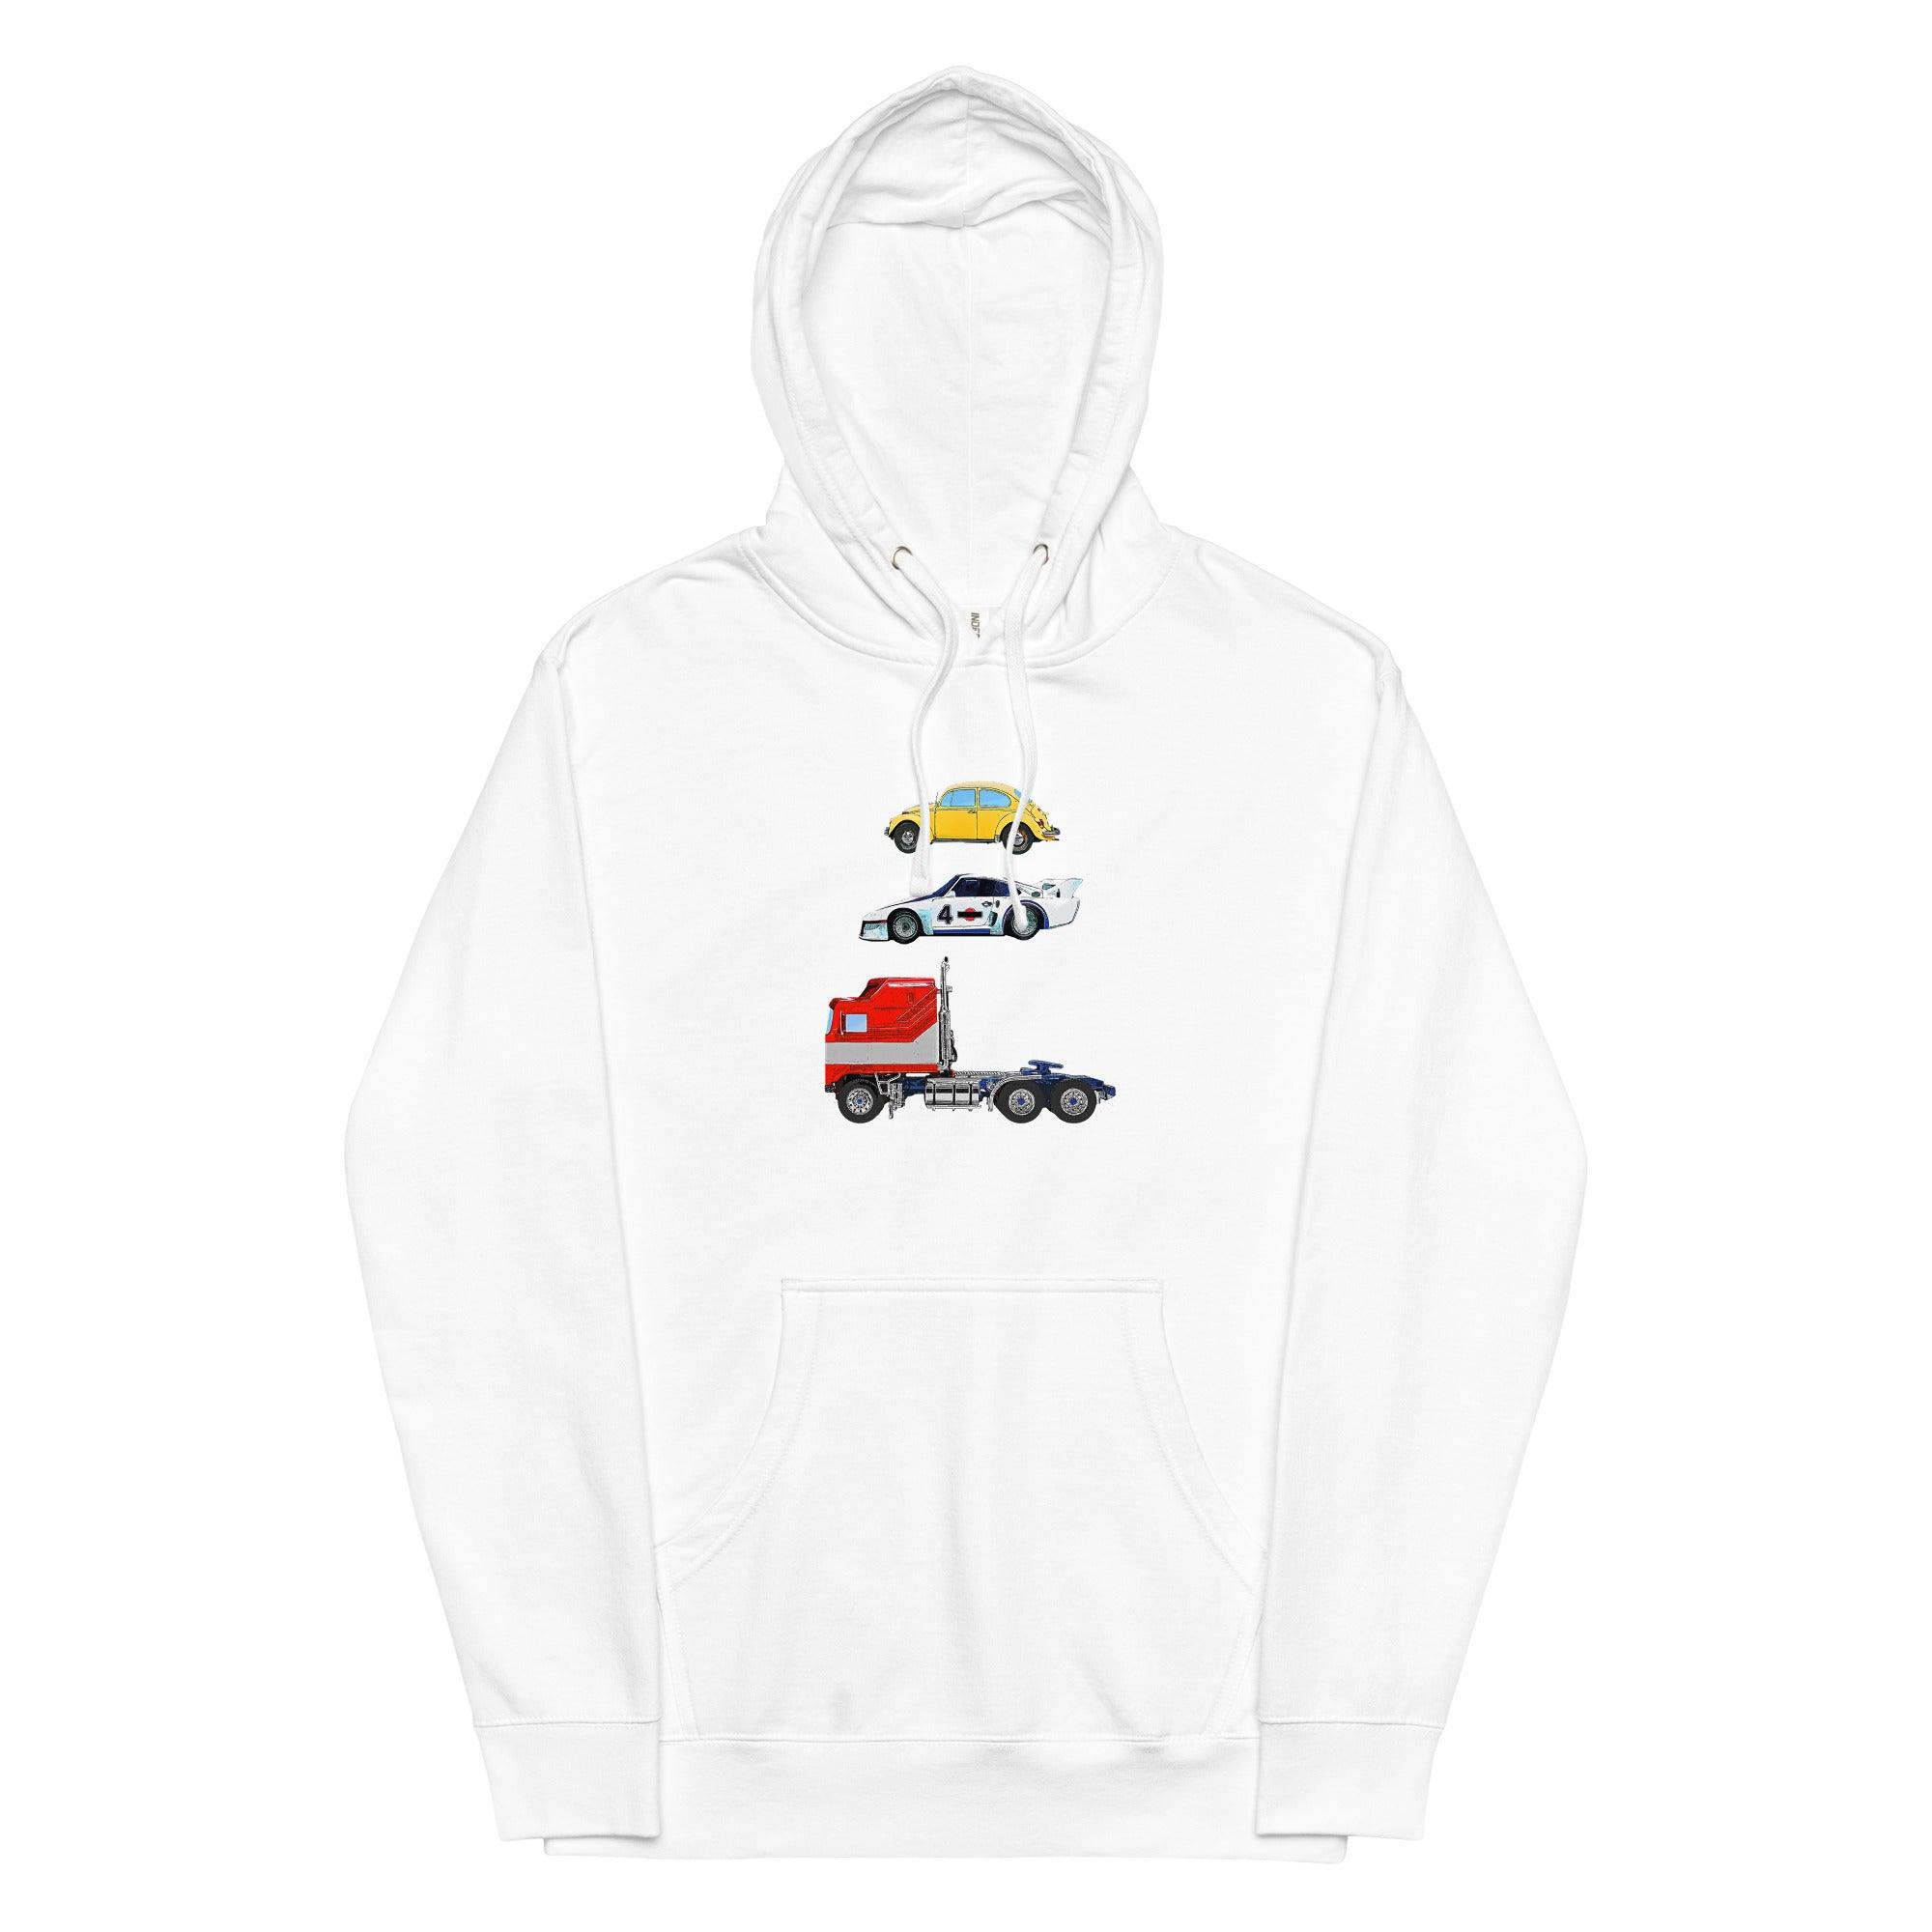 Roll Out! Unisex Hoodie